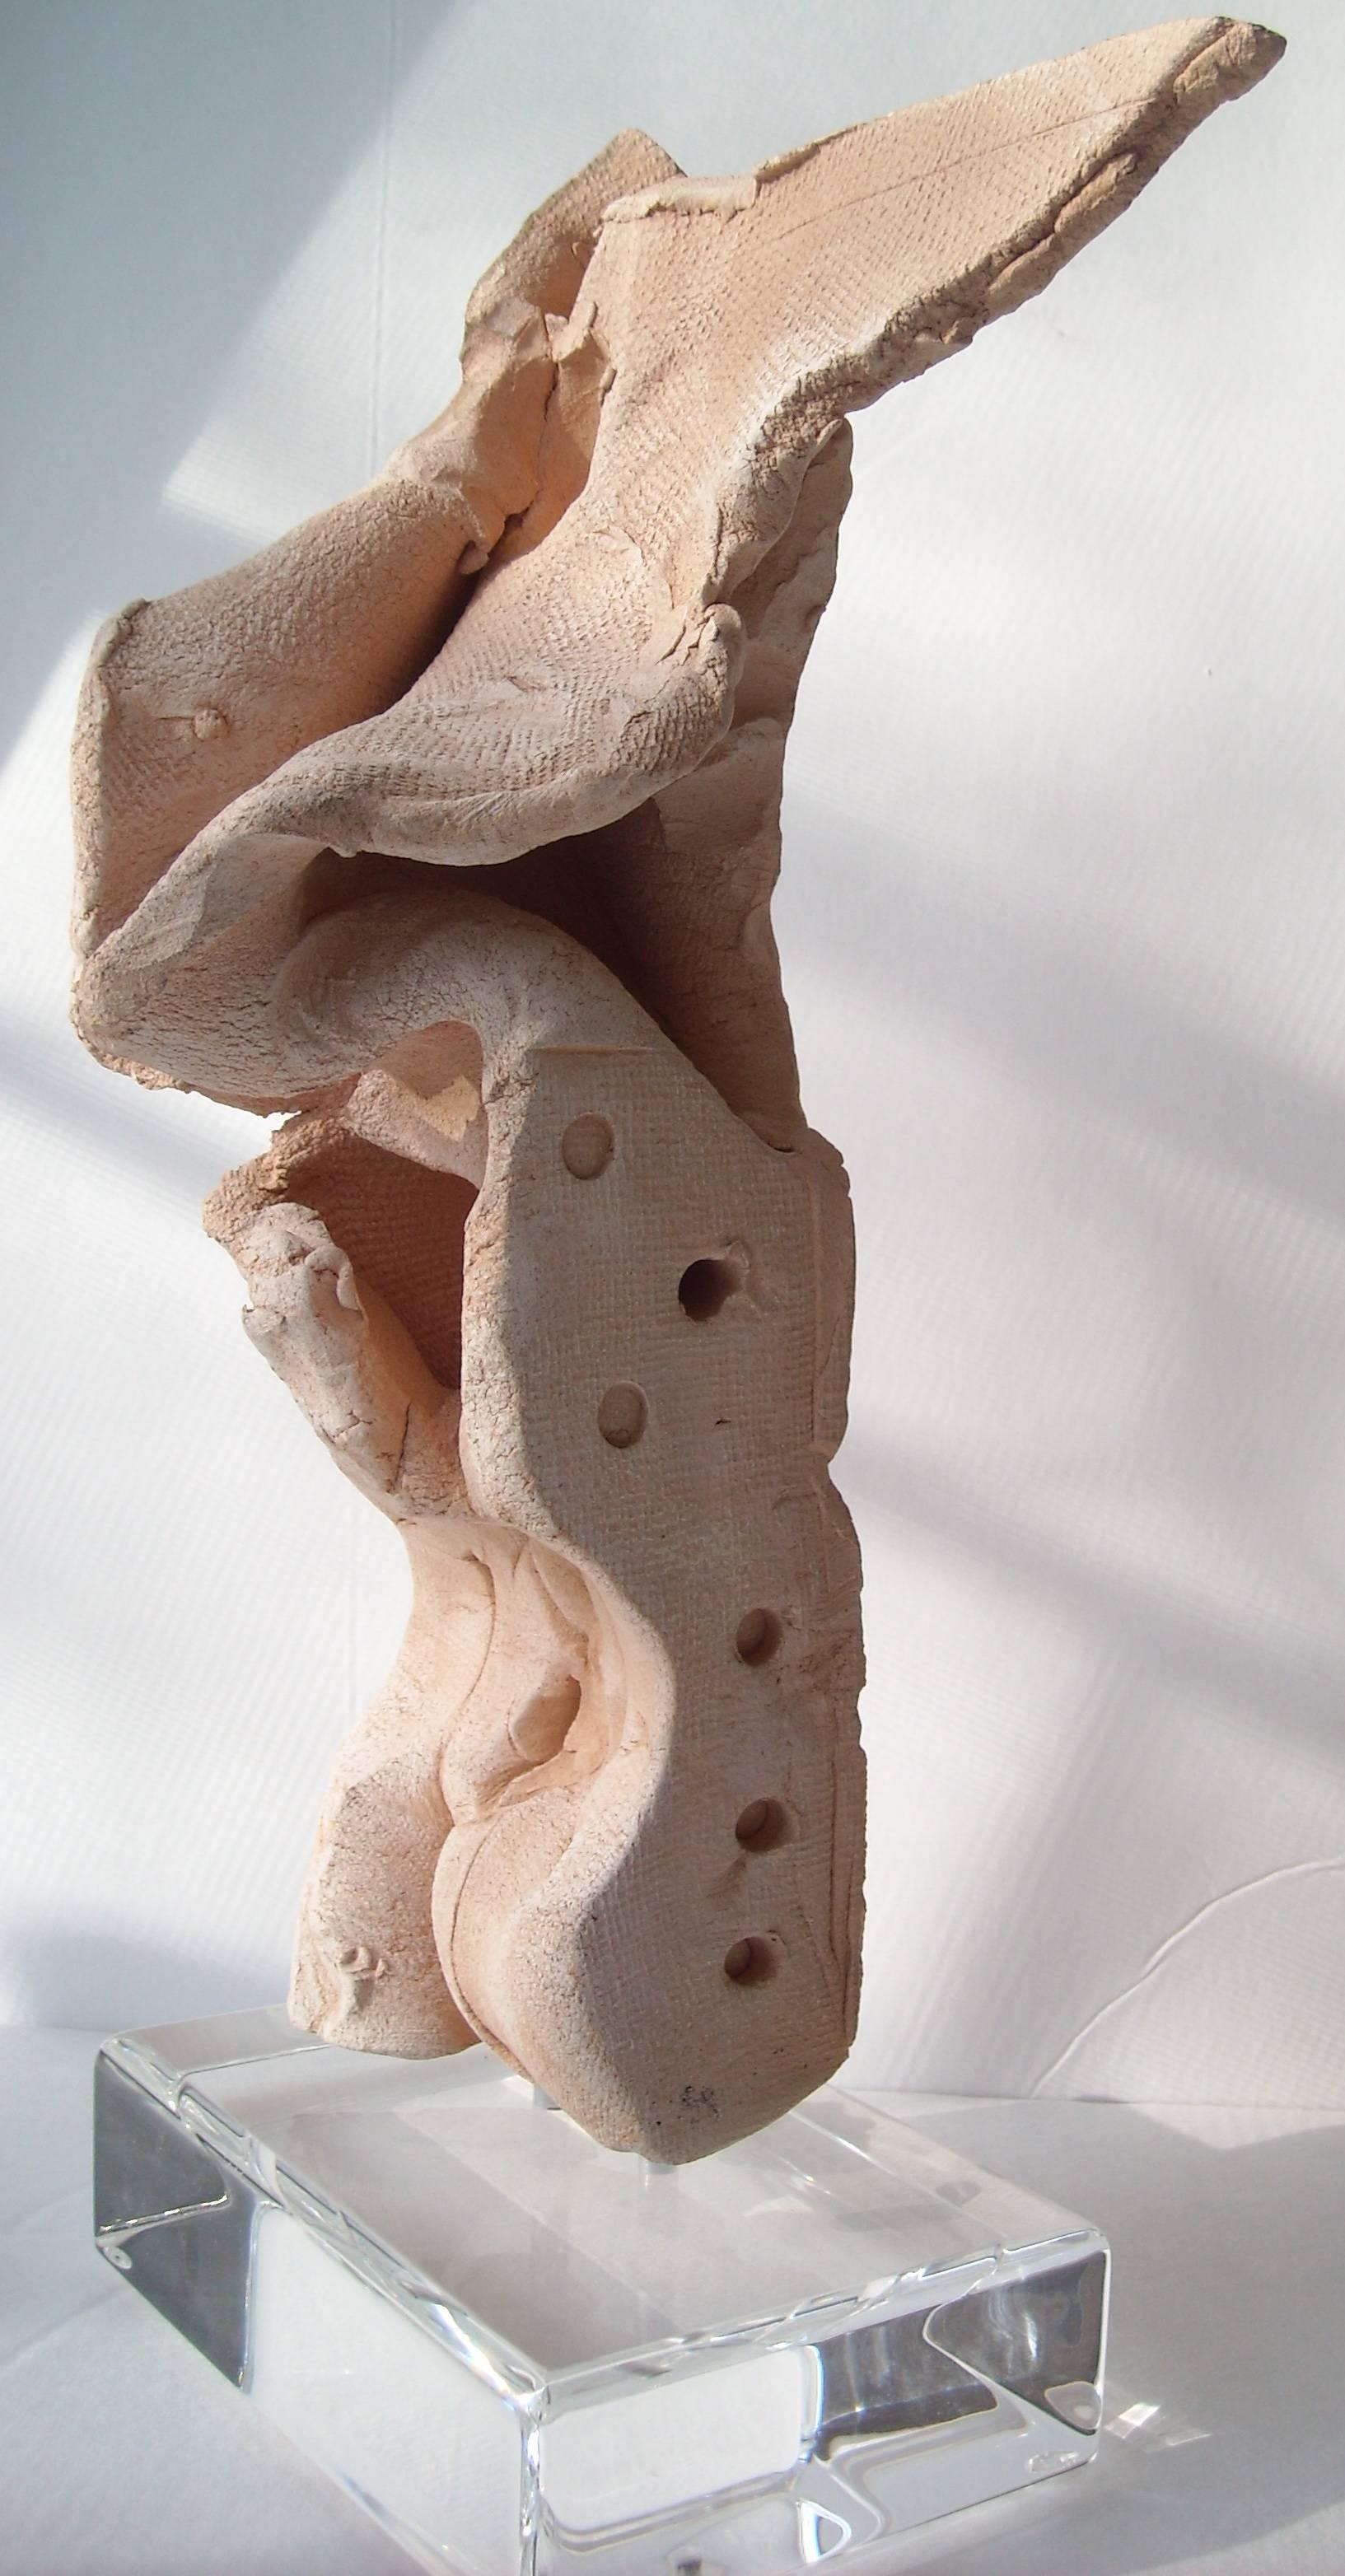 clay sculpture abstract